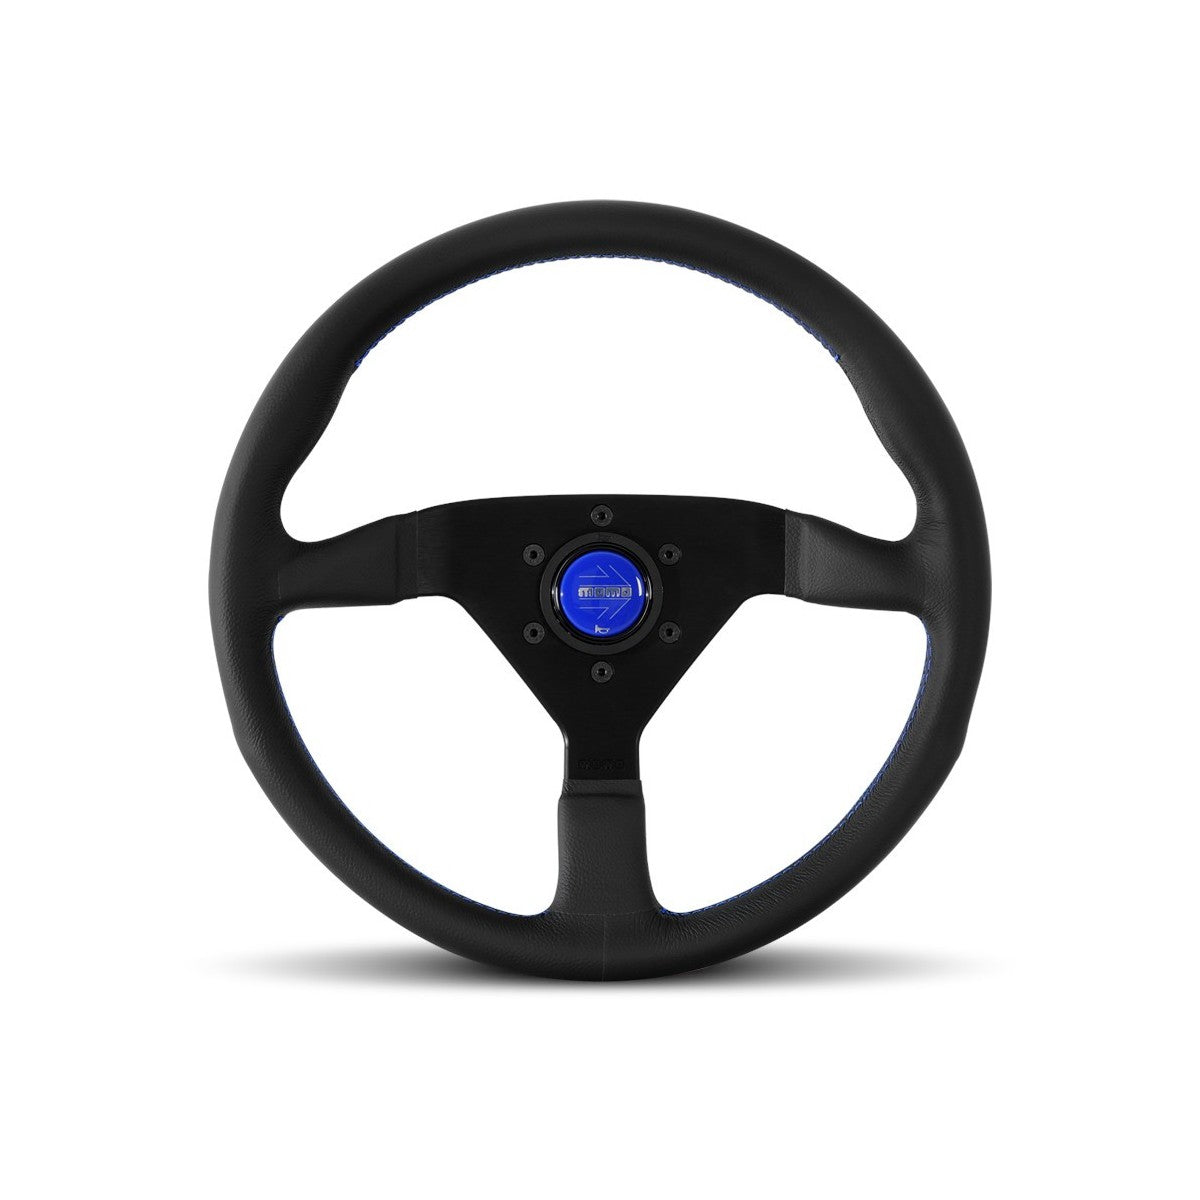 MOMO Montecarlo Steering Wheel 350 mm - Black Leather/Blue Stitch/Black Anodized Spokes - Dirty Racing Products